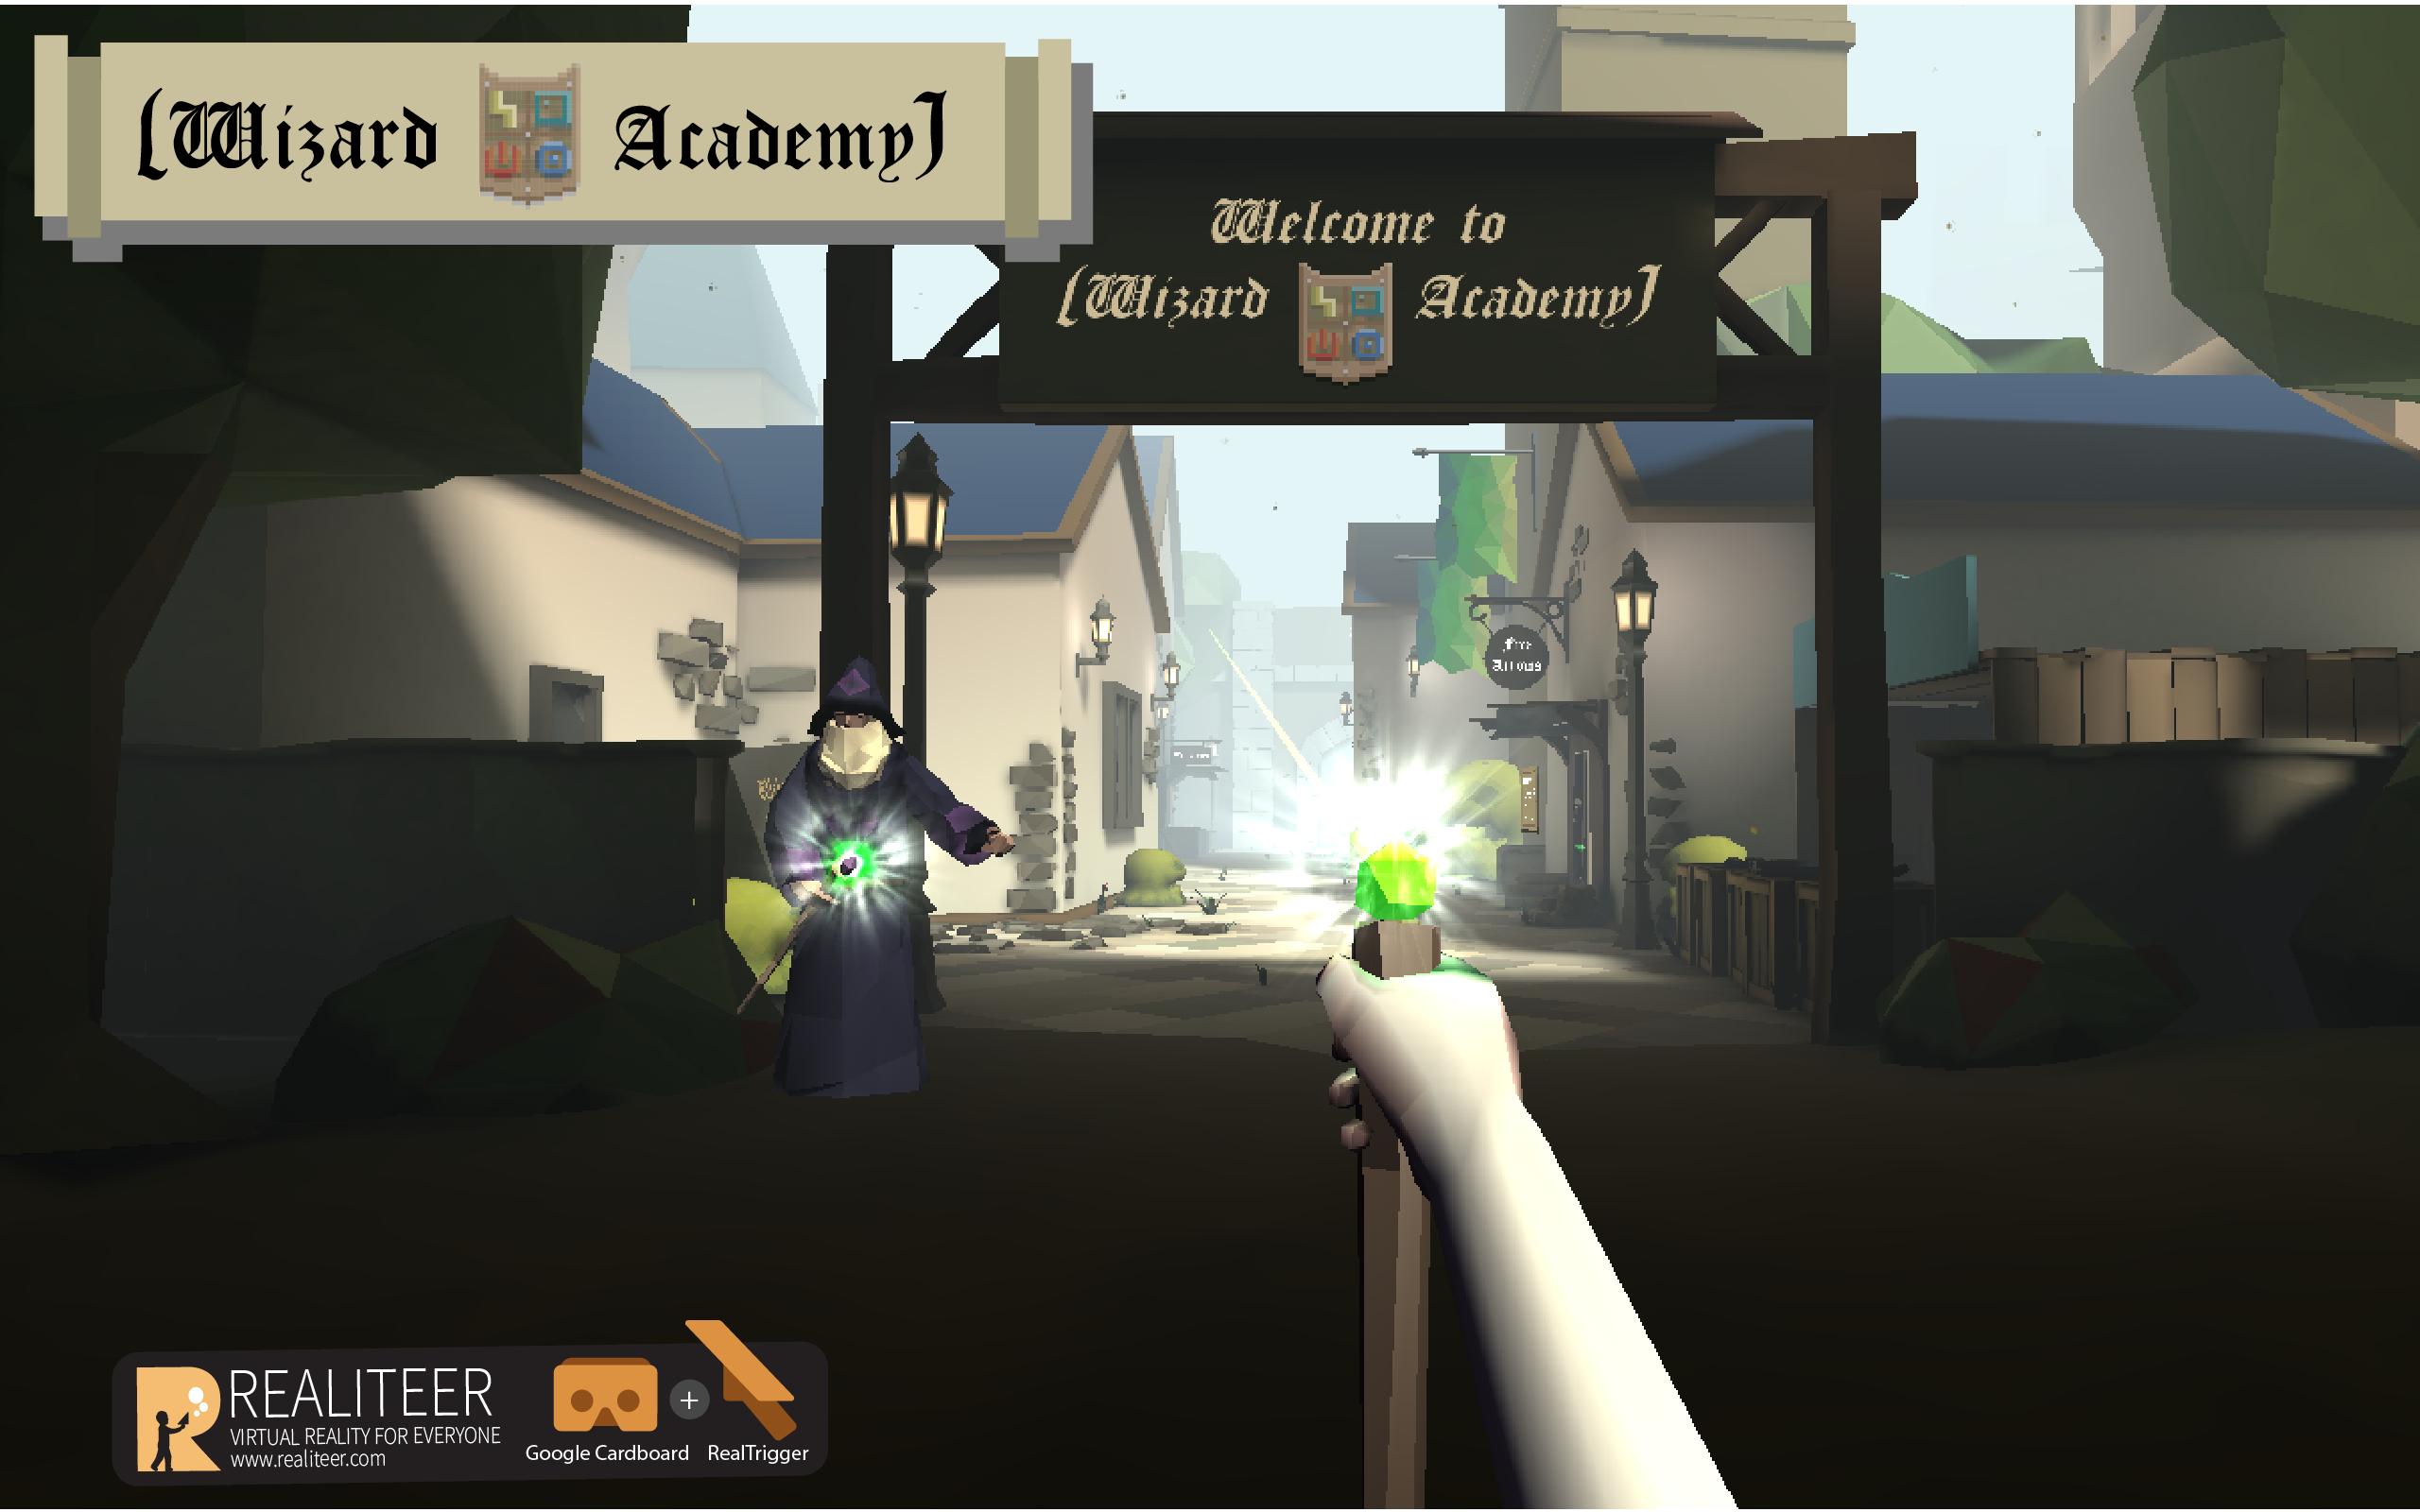 Wizard Academy VR for Android - APK Download